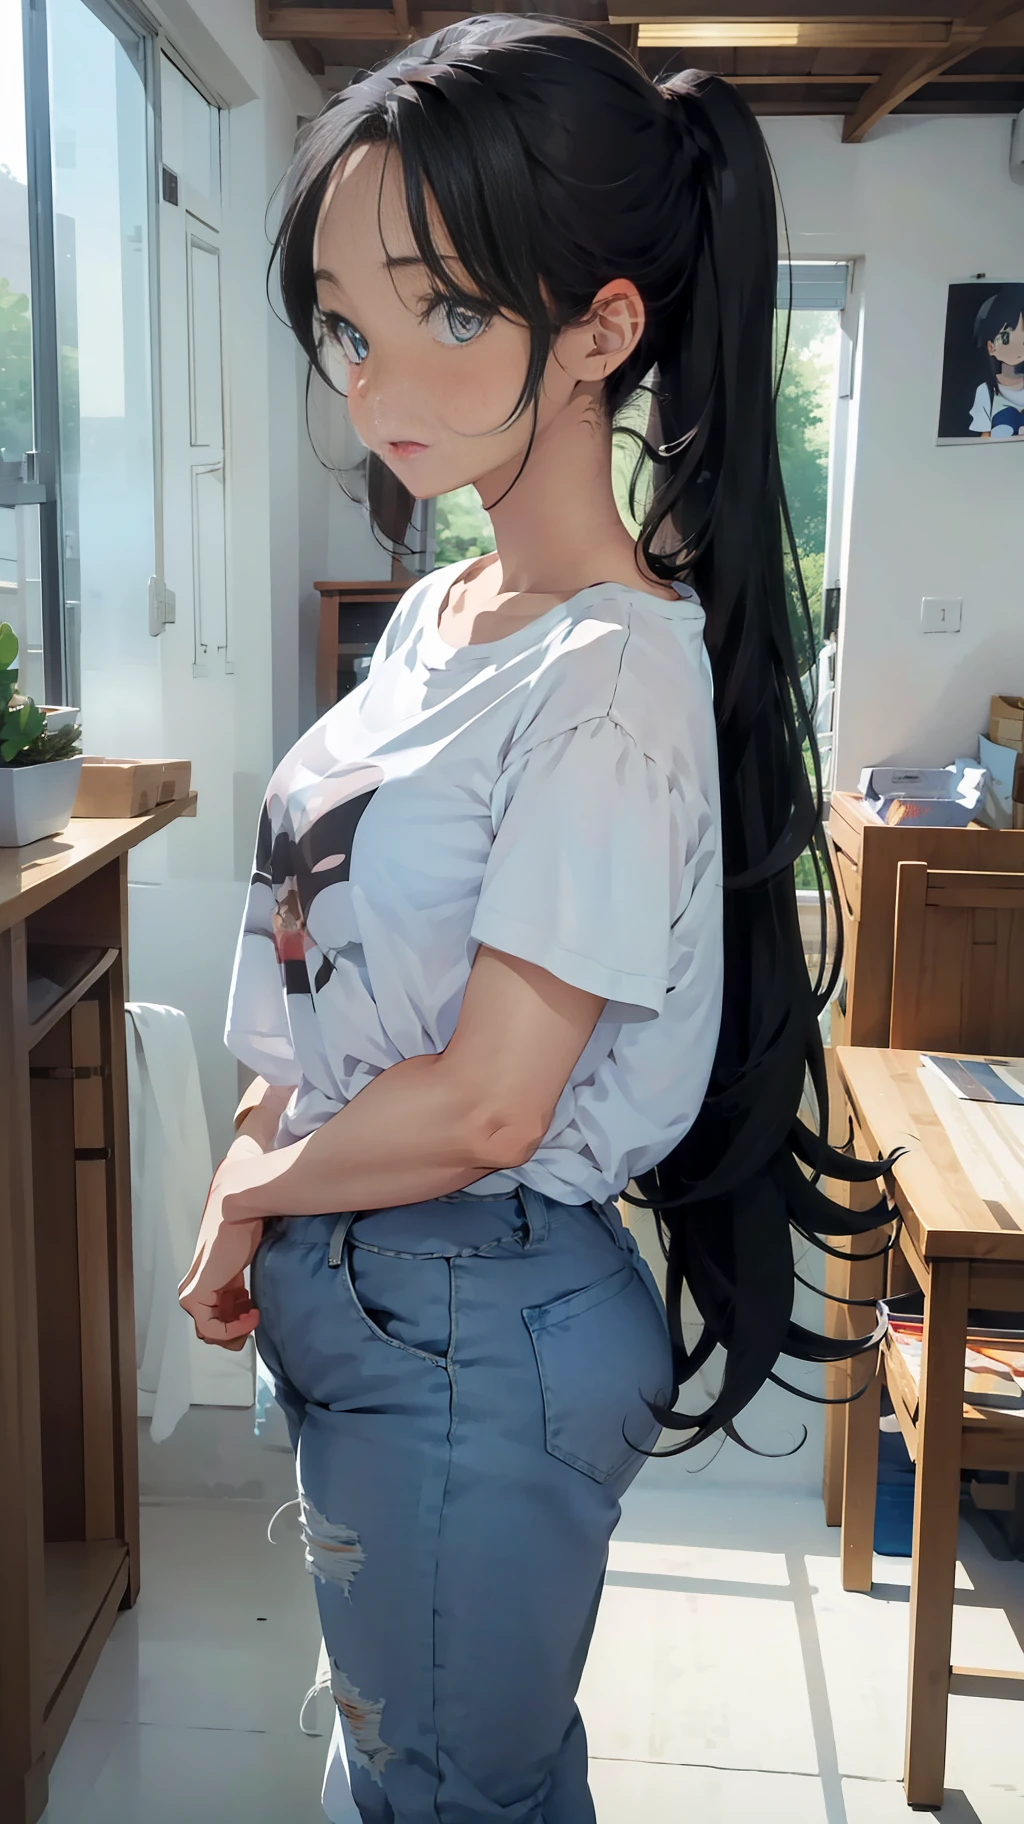 one woman, standing, tall of a person,white t-shirt,blue jeans,thin,gleaming skin,beautiful face,sharp eyes,flushed cheeks,cool,long hair,pony tale, black hair,slender face,indoor,illustration style,anime style,masterpiece, extremely fine and beautiful,illustration,adult woman